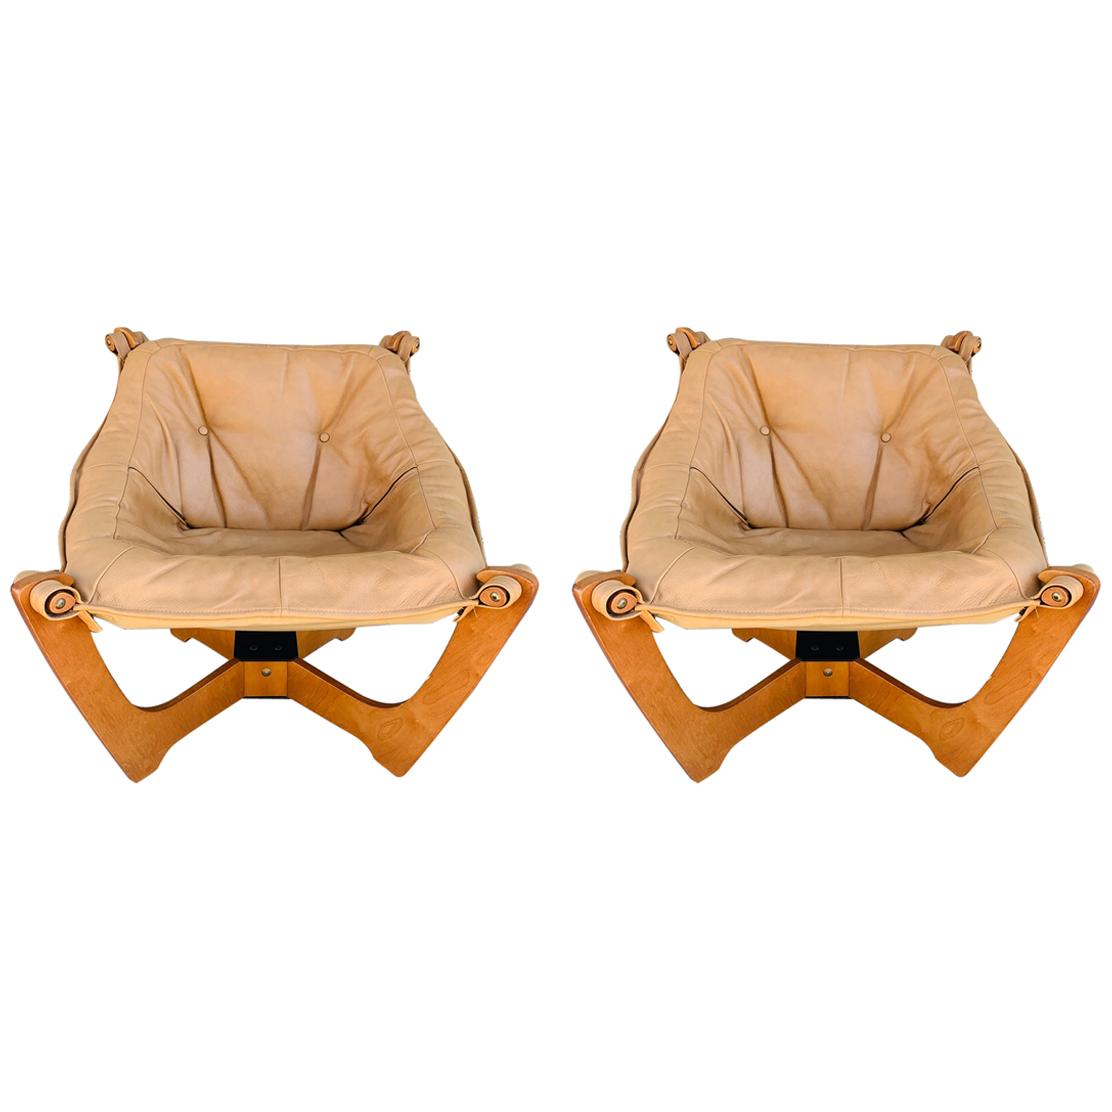 Pair of 'Luna' Chairs by Odd Knutsen in Tan Leather